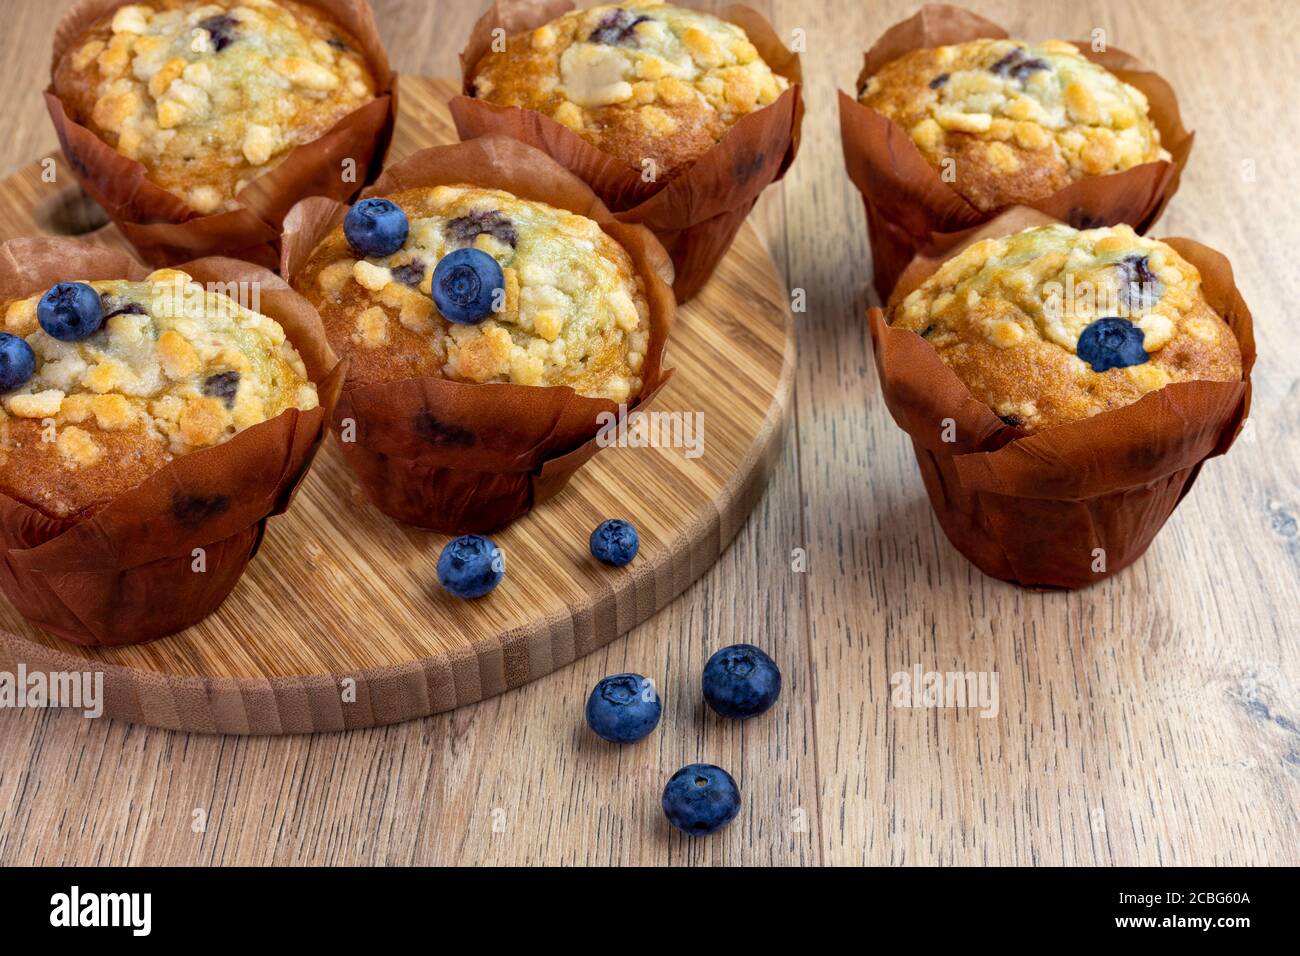 blueberry muffins with scattered berries on the wooden table Stock Photo